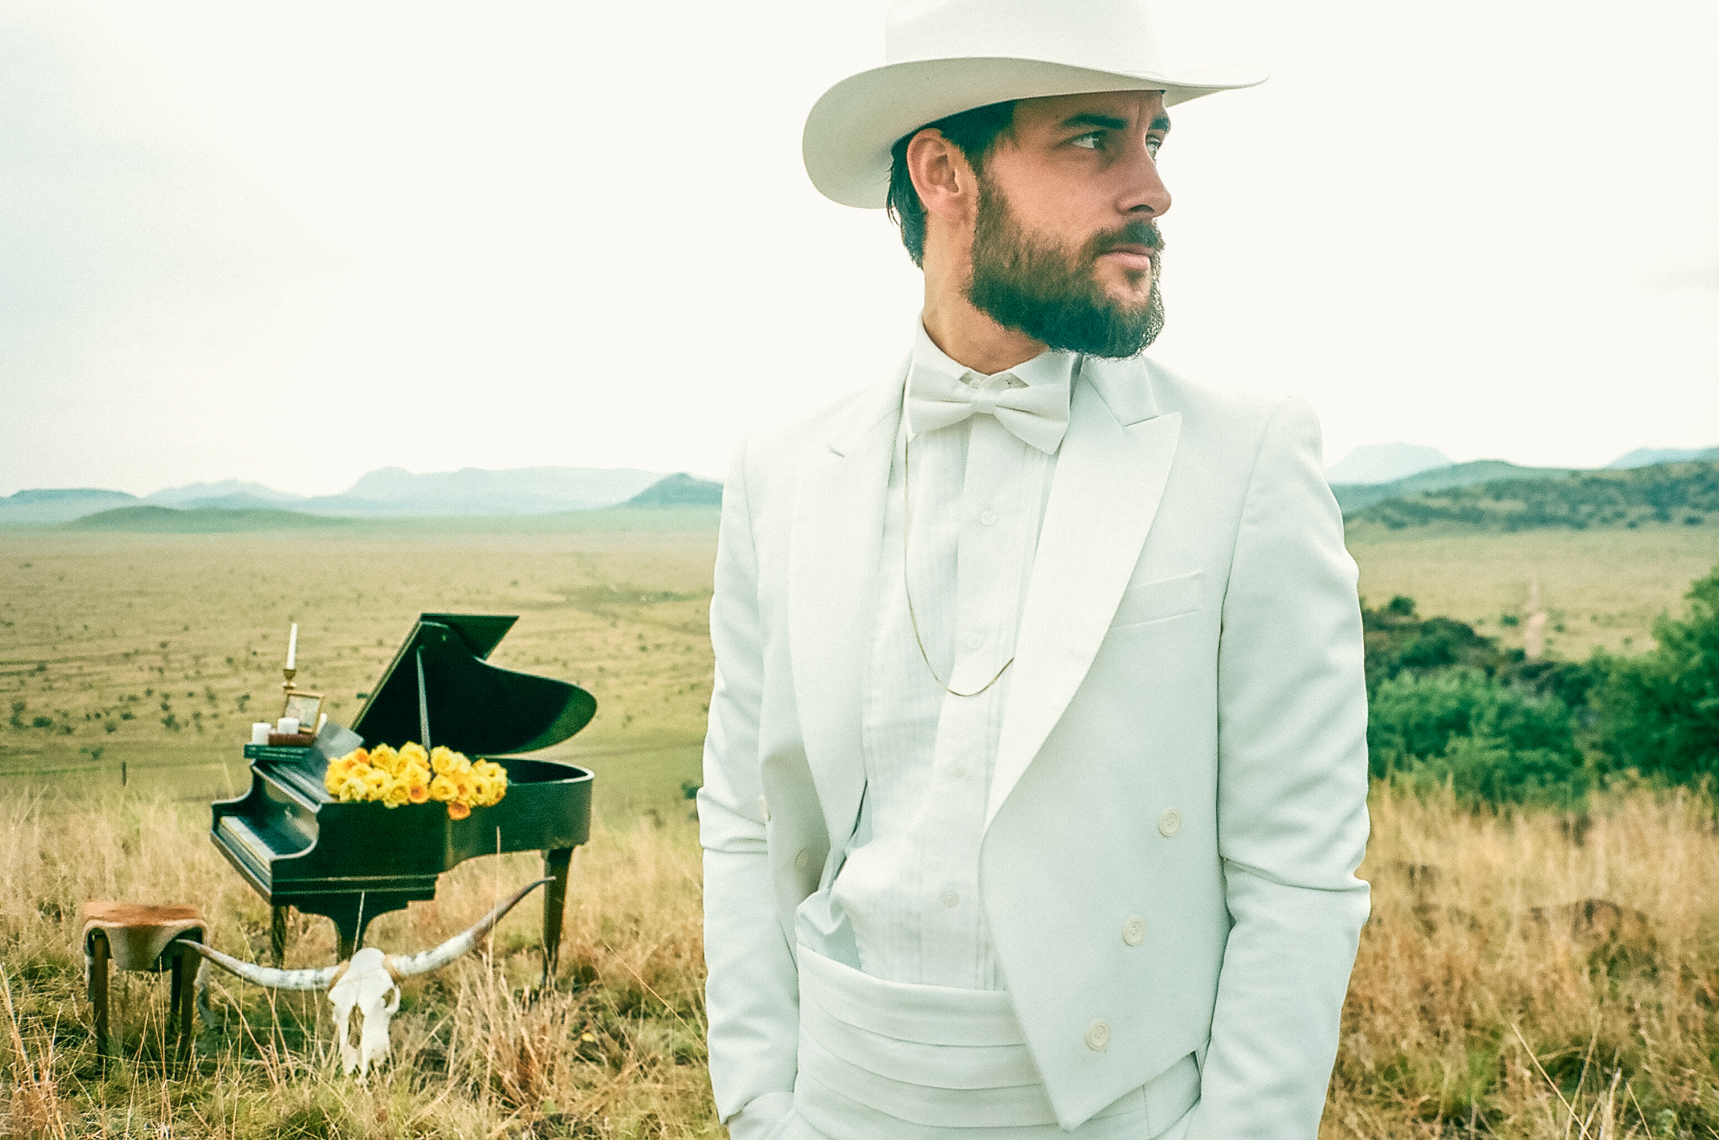 Robert Ellis, standing in a field with a grand piano behind him, looks off to the right